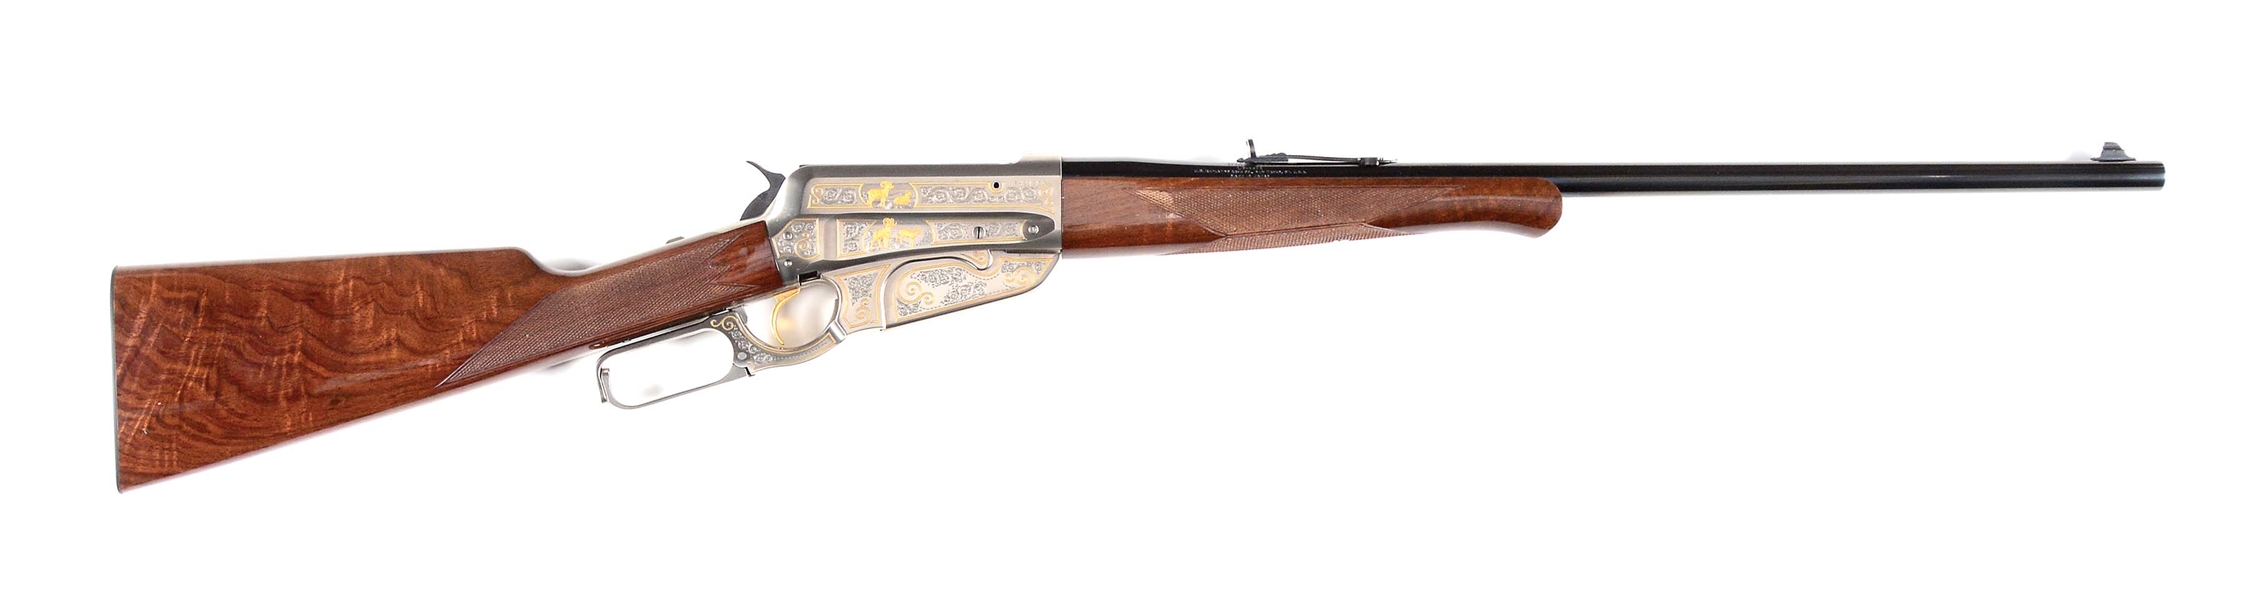 (M) VERY ATTRACTIVE WINCHESTER MODEL 1895 HIGH GRADE LEVER ACTION RIFLE.